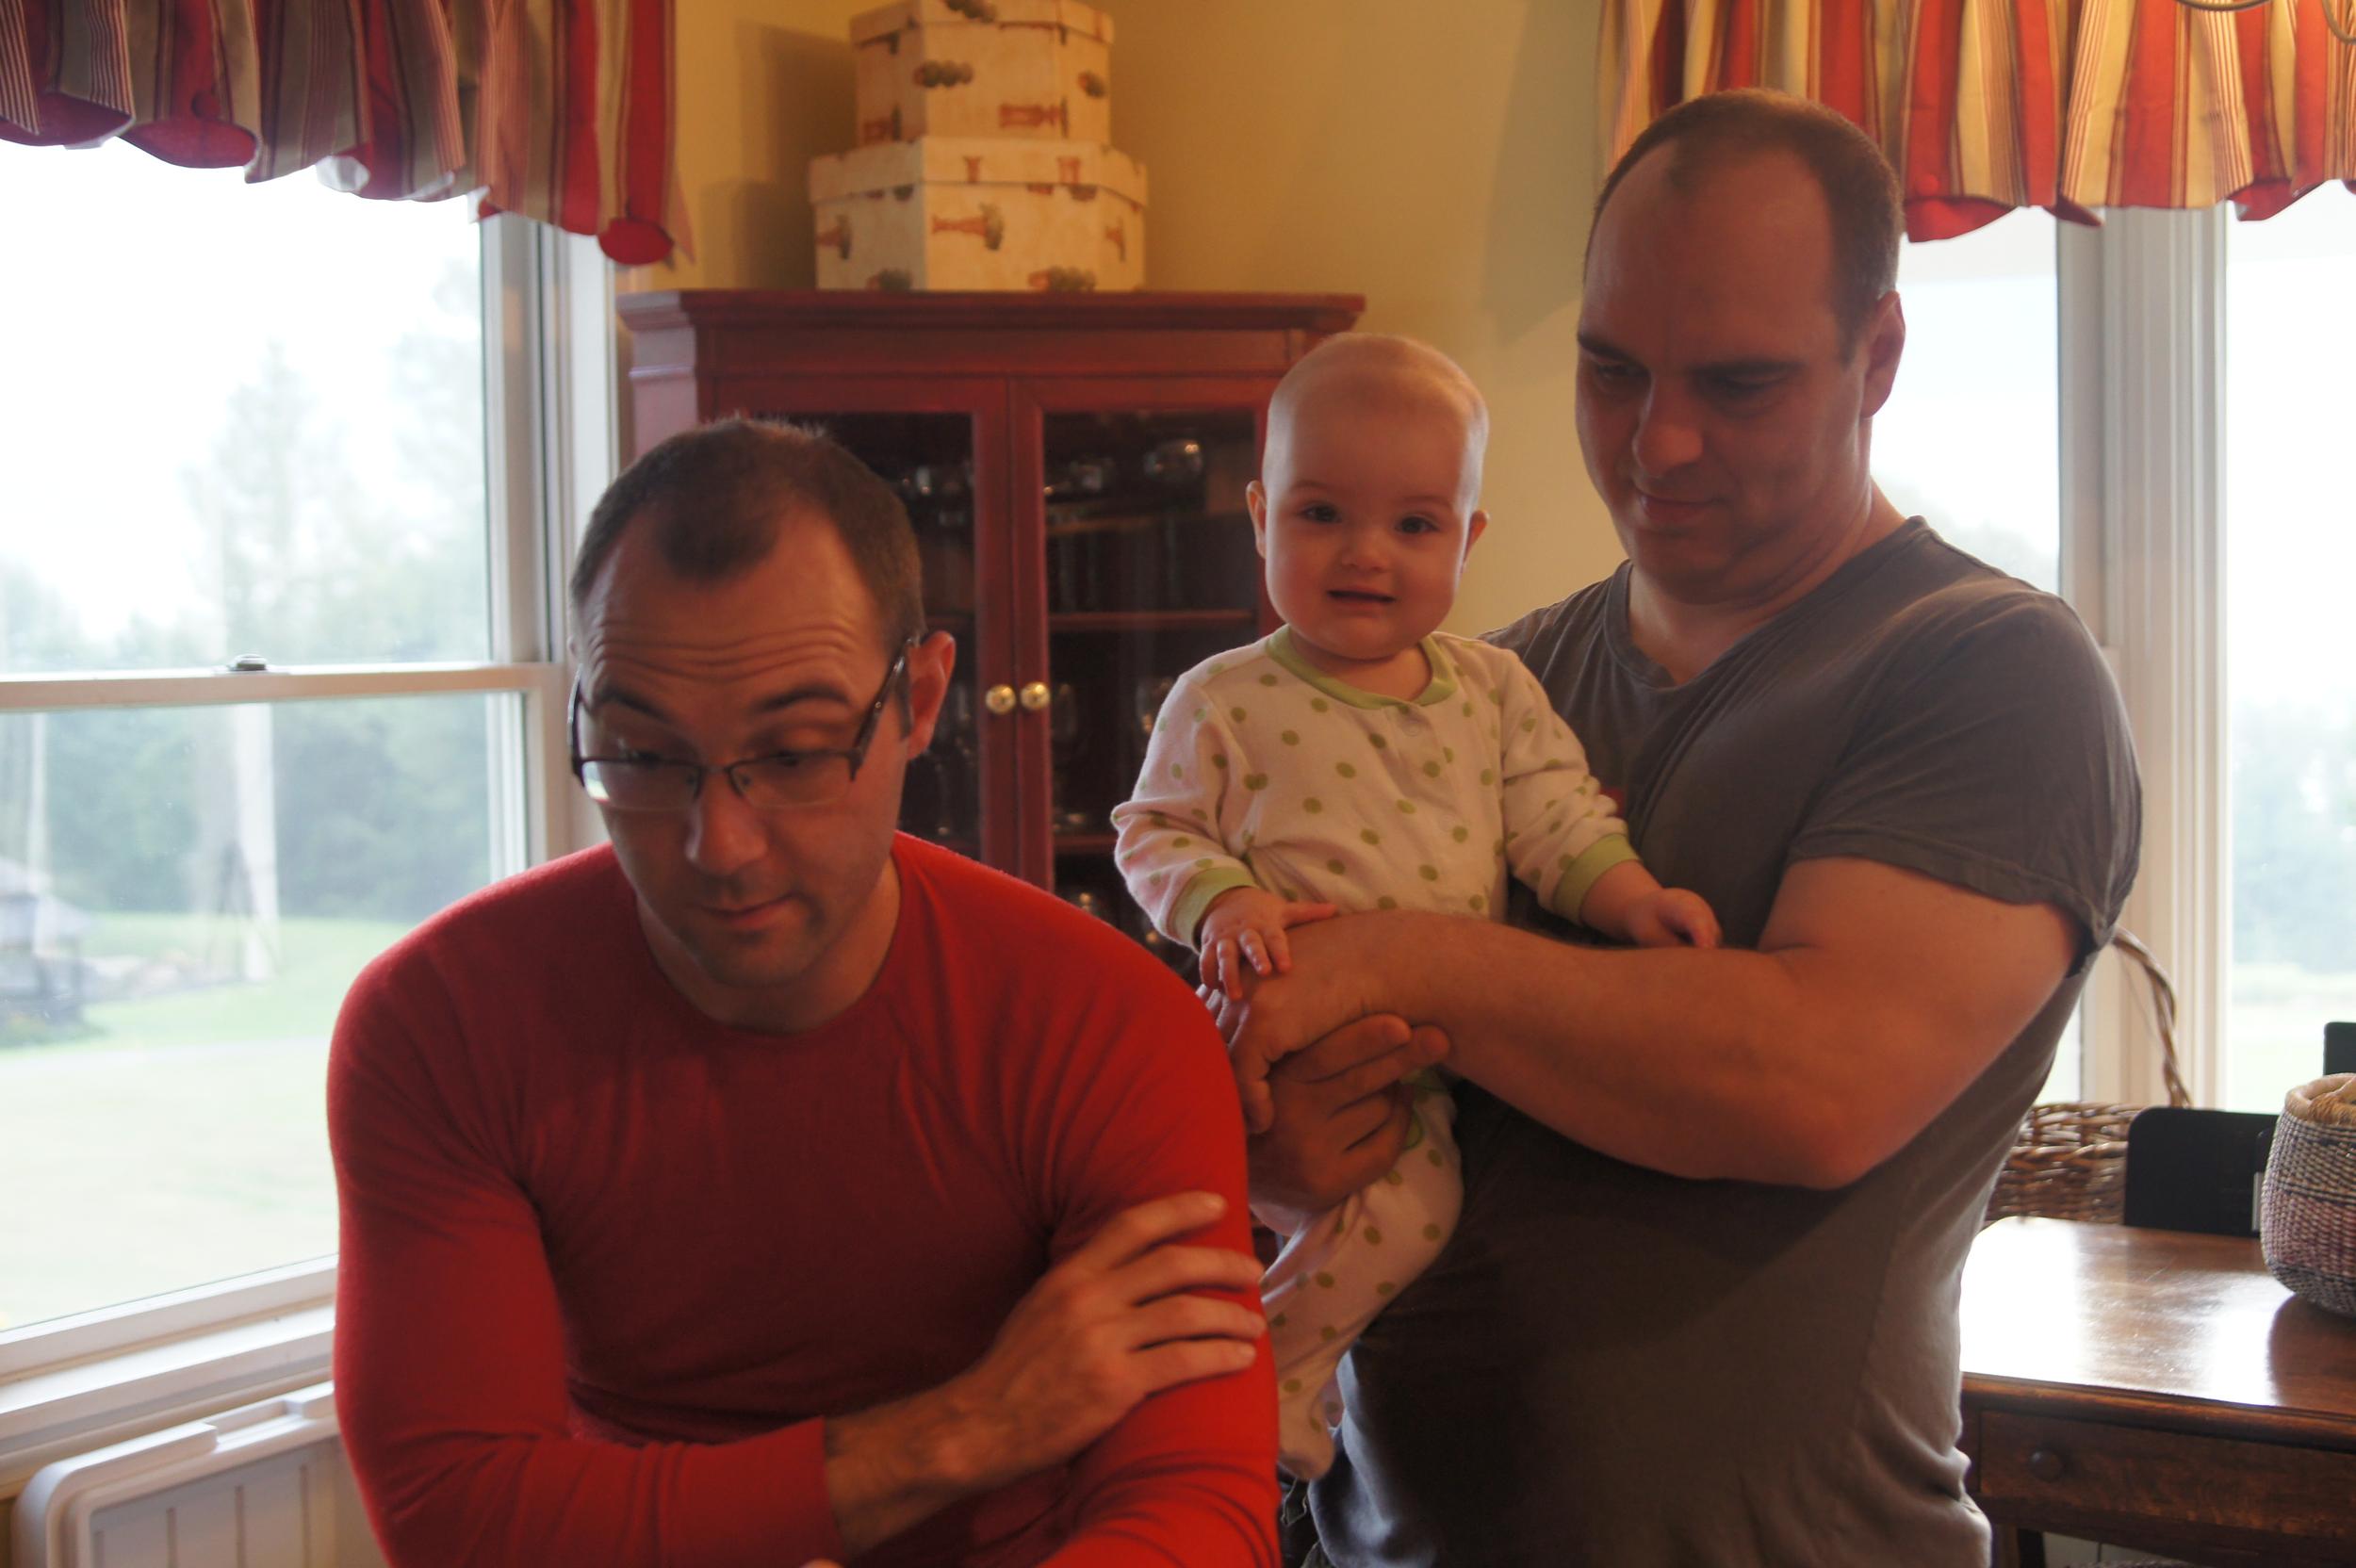 A dad, an uncle, and the cutest spriteling in the house.